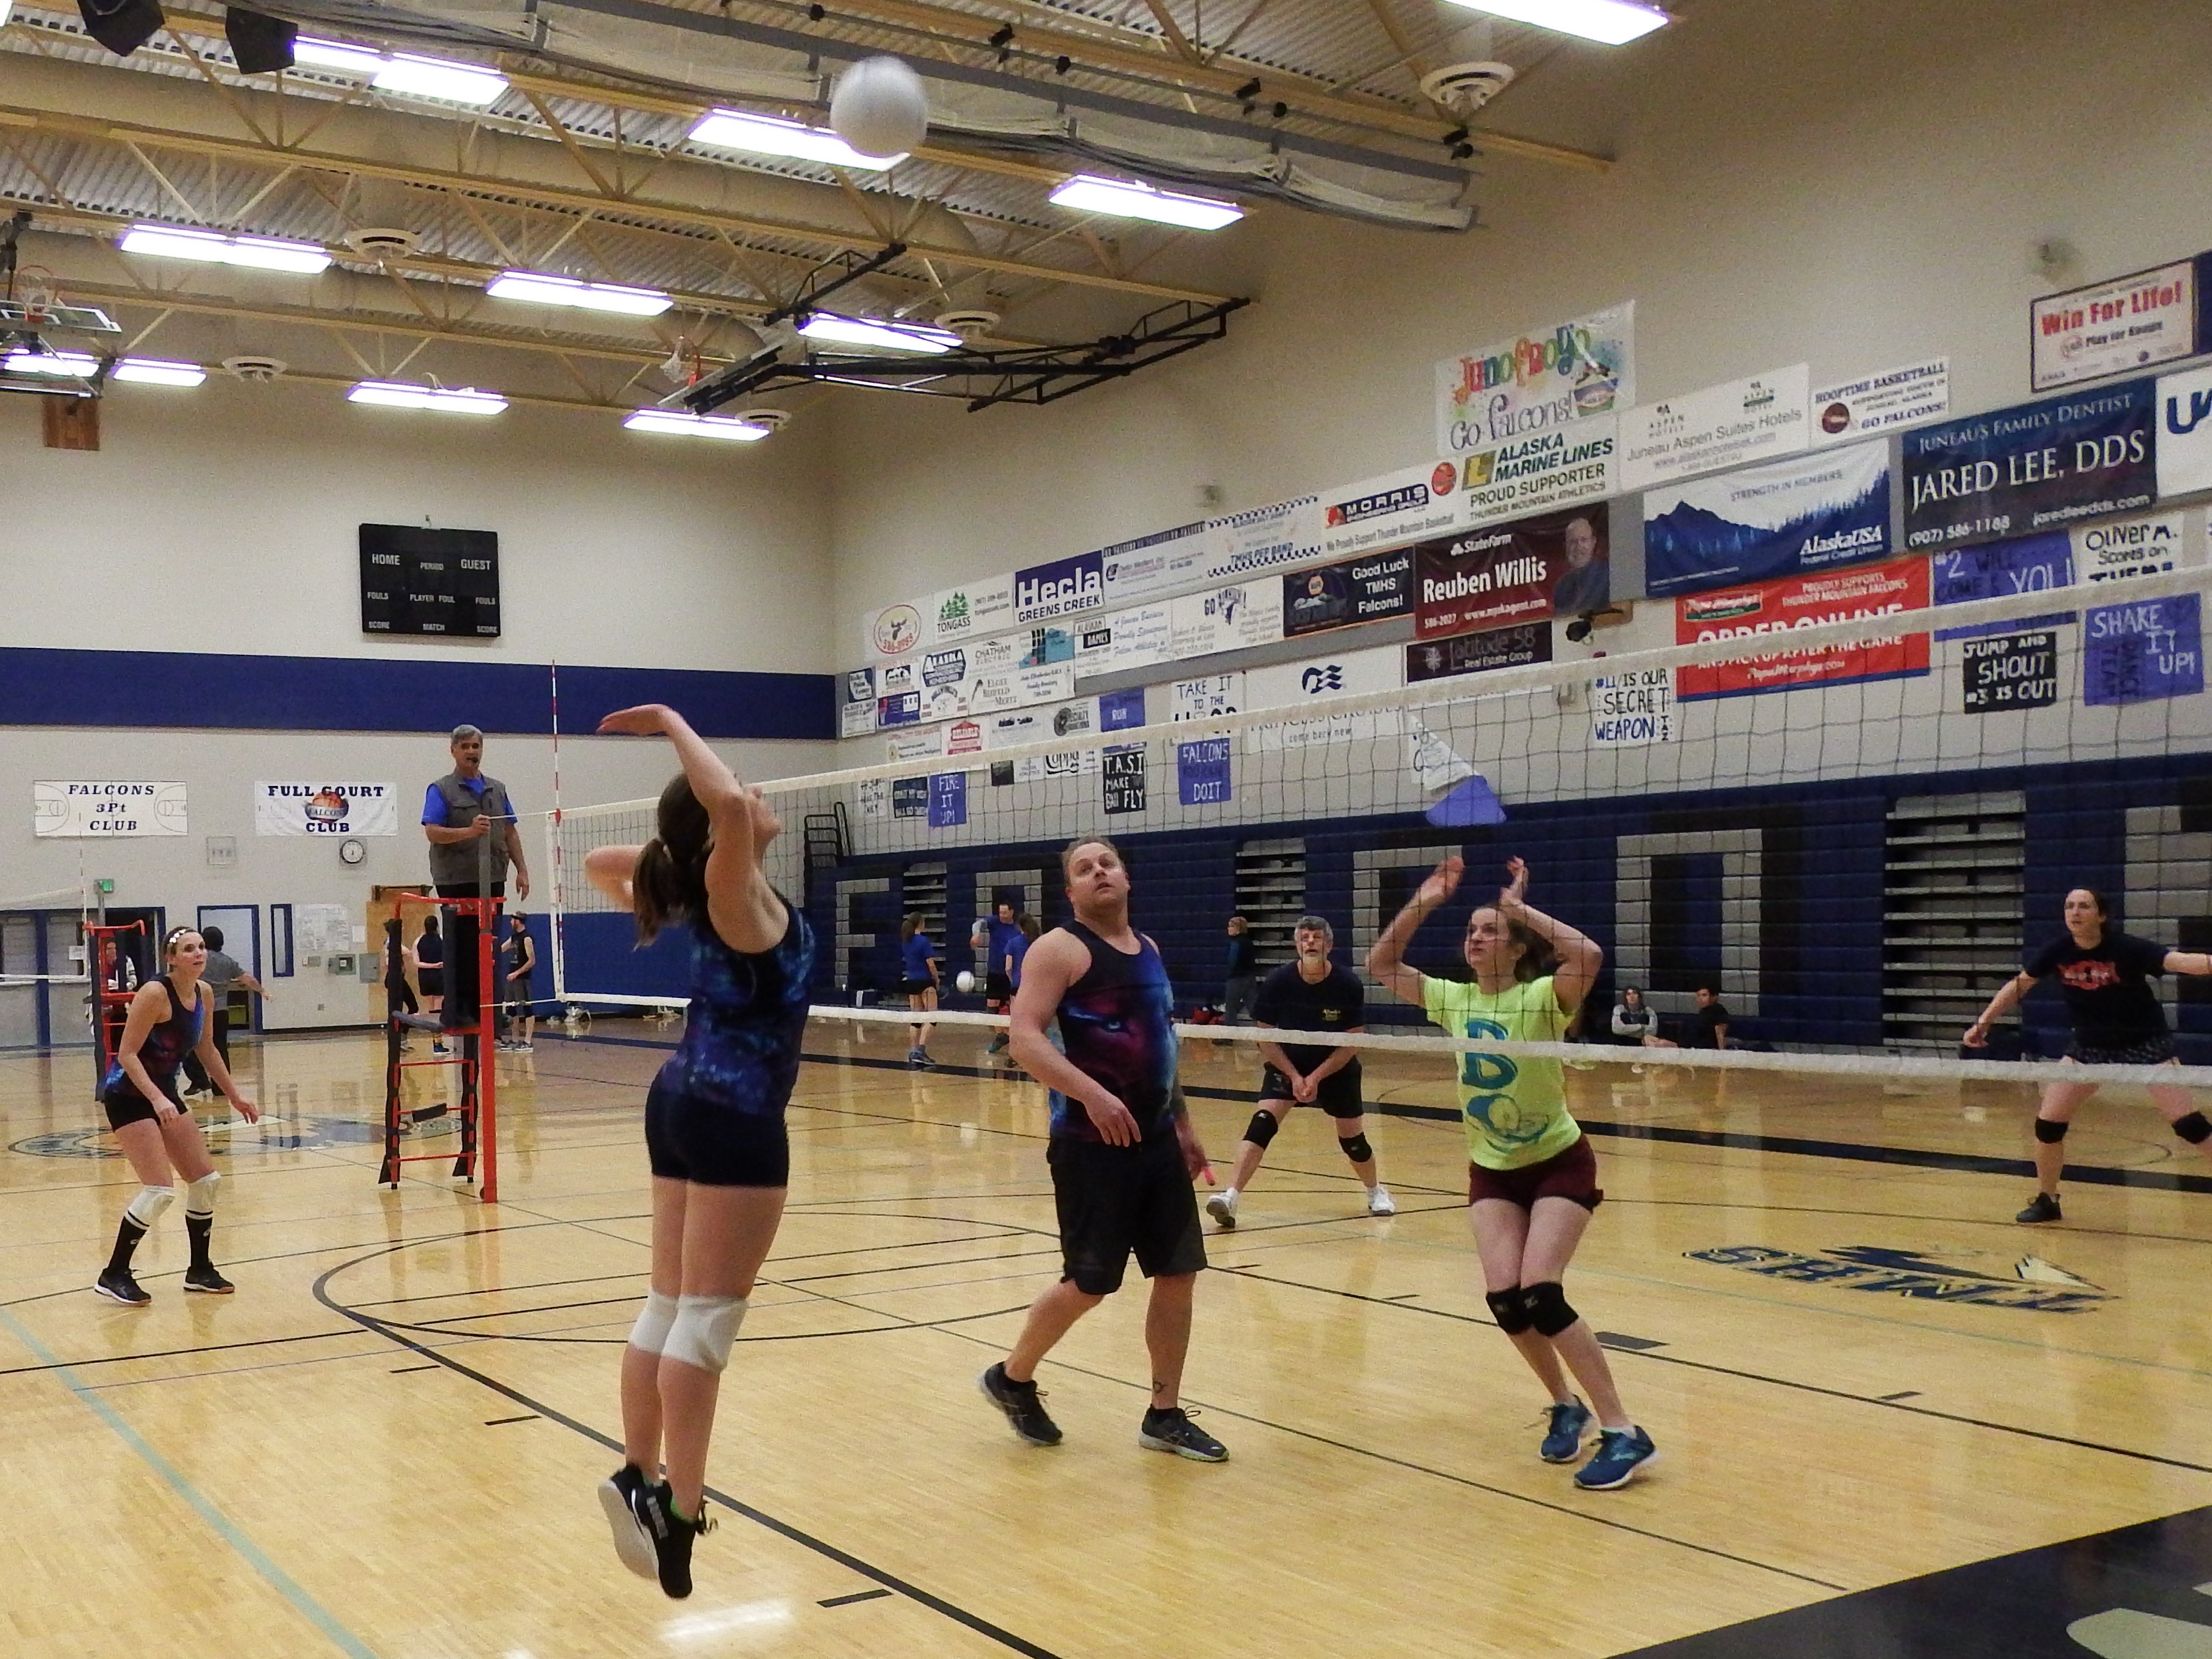 Volleyball players at the R4 tournament.